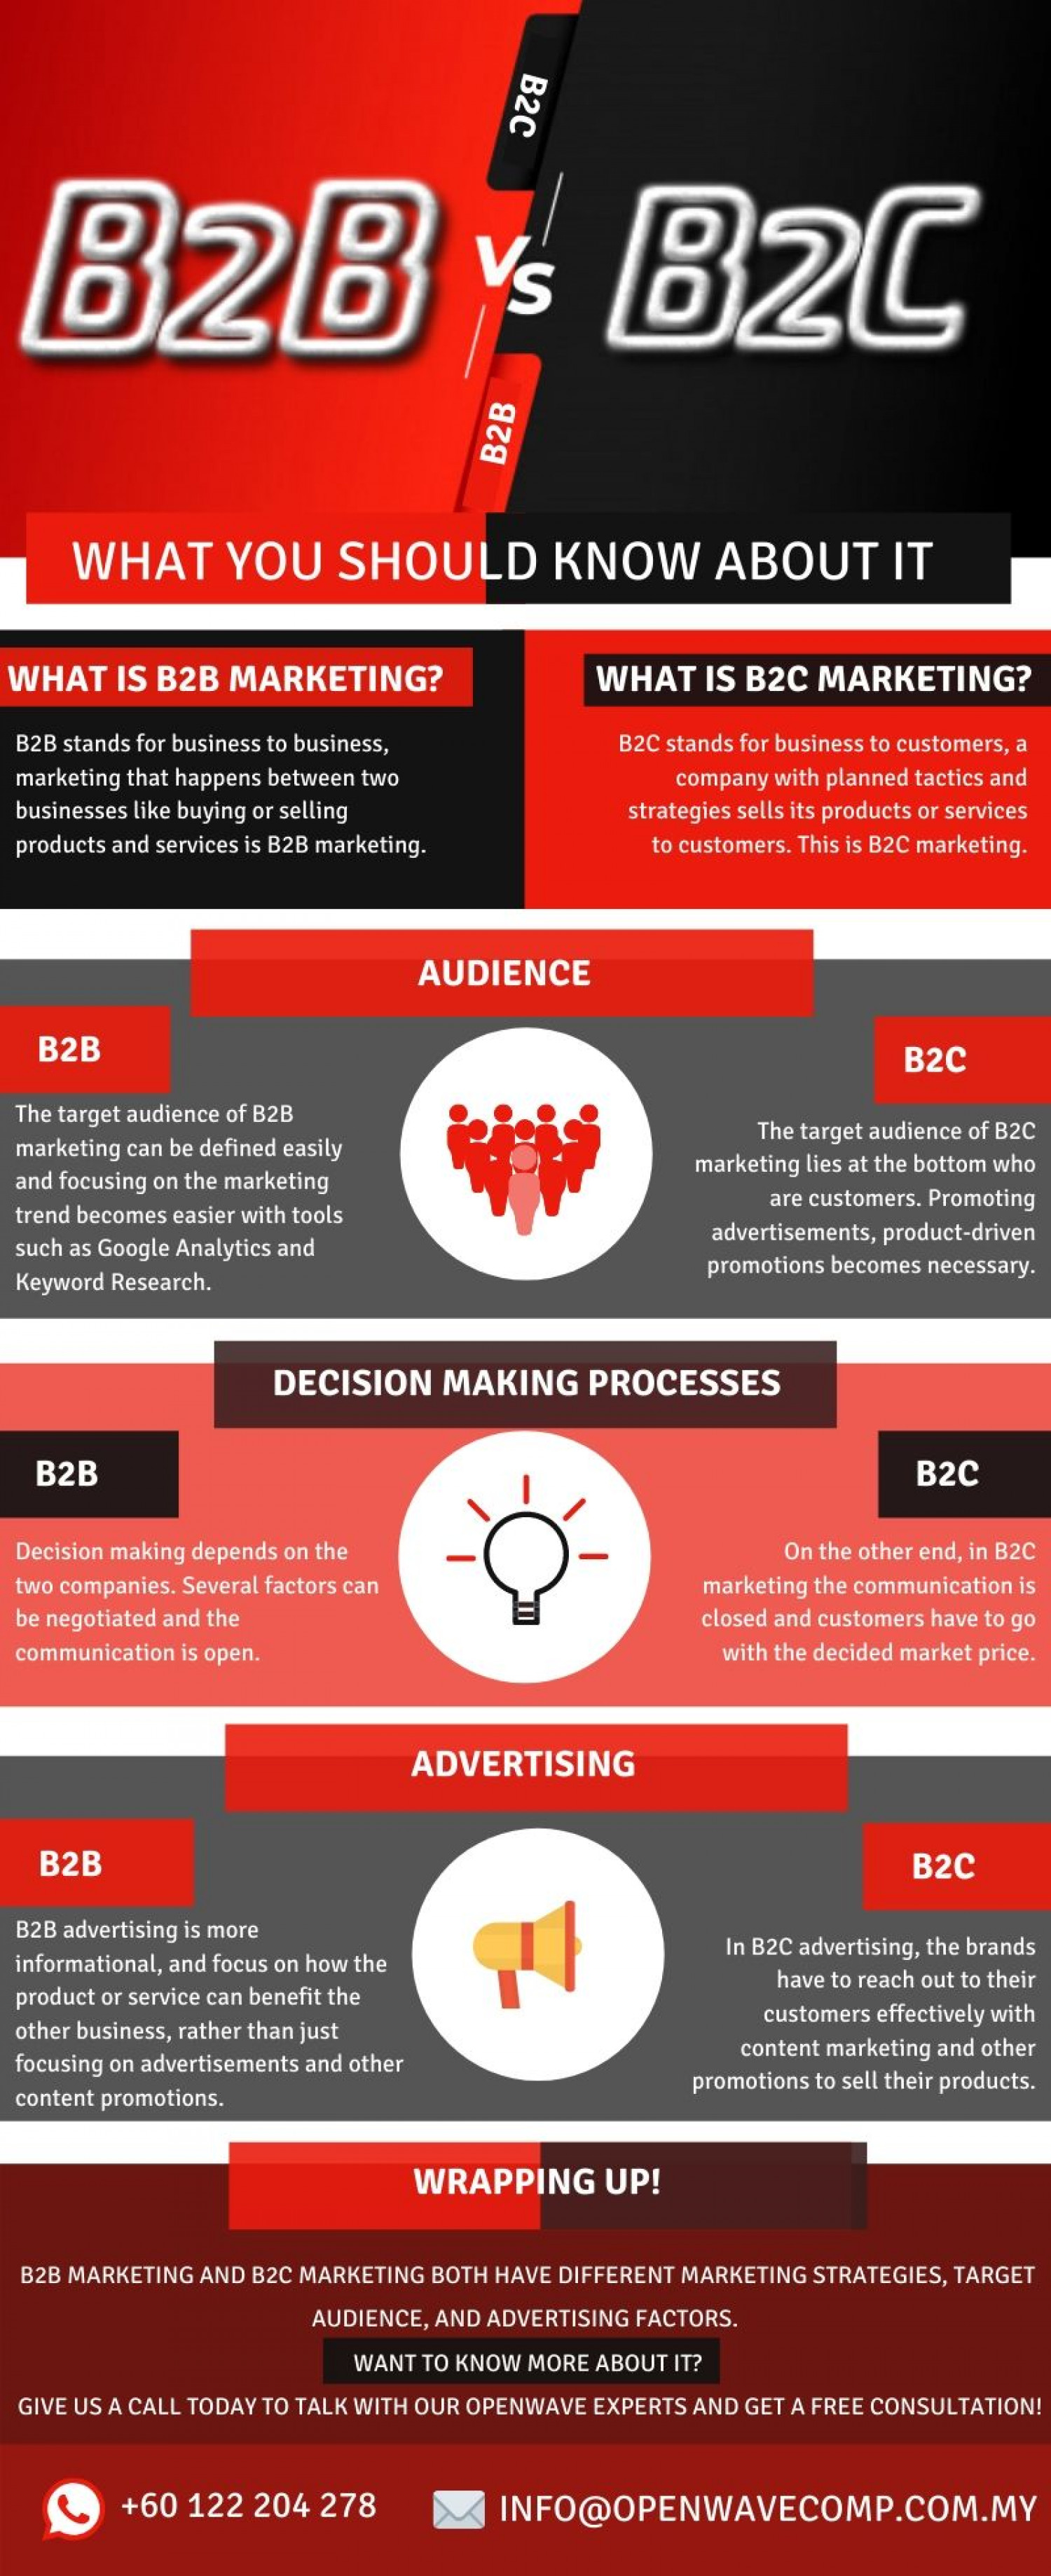 B2B Marketing vs B2C Marketing – What You Should Know About it Infographic